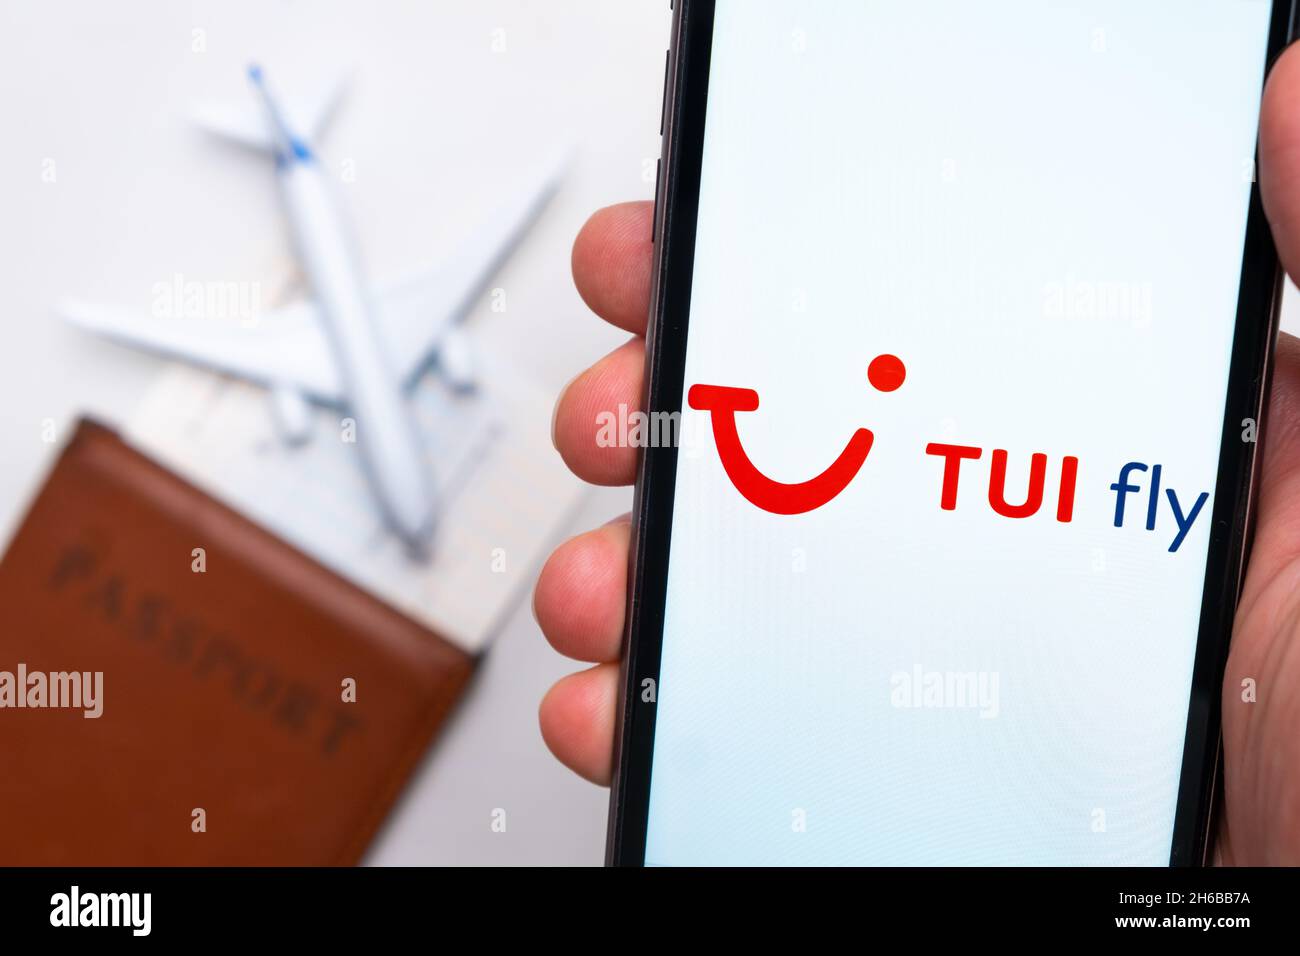 Tui fly airline. A mobile phone and Tui fly airline application in mans hand. There is a passport and a plane on a white table. November 2021, San Francisco, USA Stock Photo